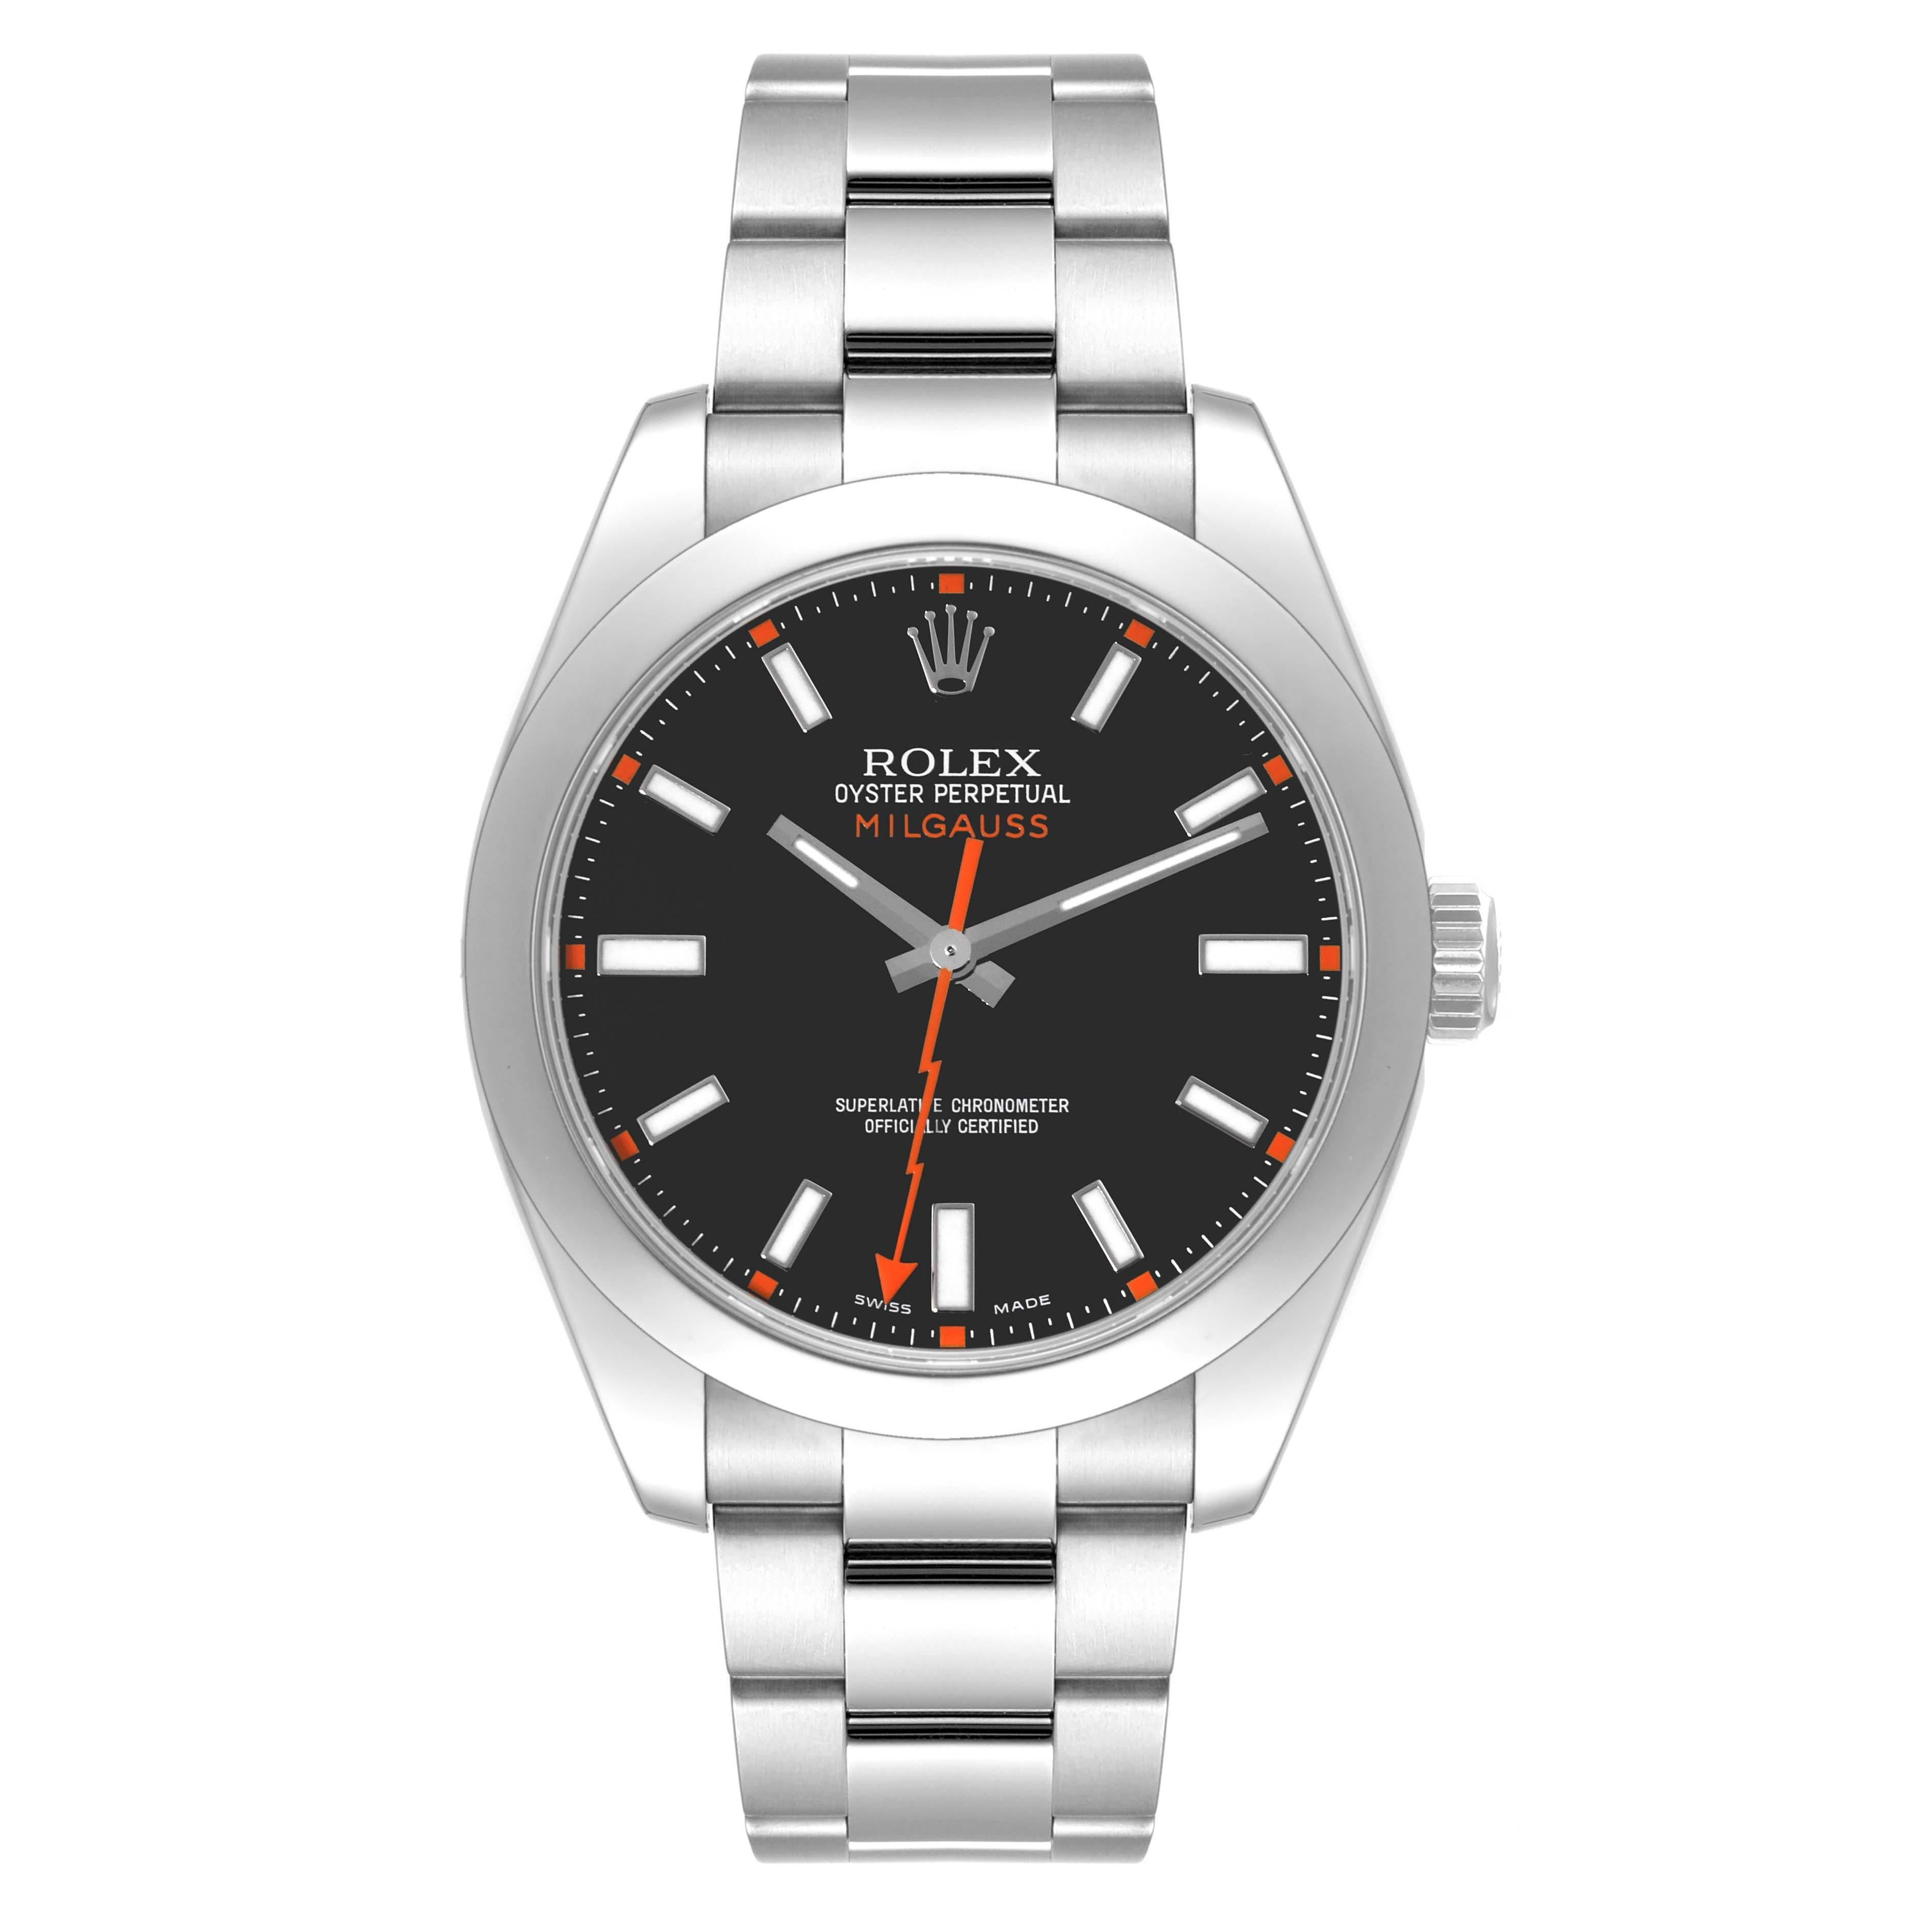 Rolex Milgauss Black Dial Steel Mens Watch 116400 Box Card. Officially certified chronometer automatic self-winding movement. Stainless steel case 40.0 mm in diameter. Stainless steel smooth domed bezel. Scratch resistant sapphire crystal. Black